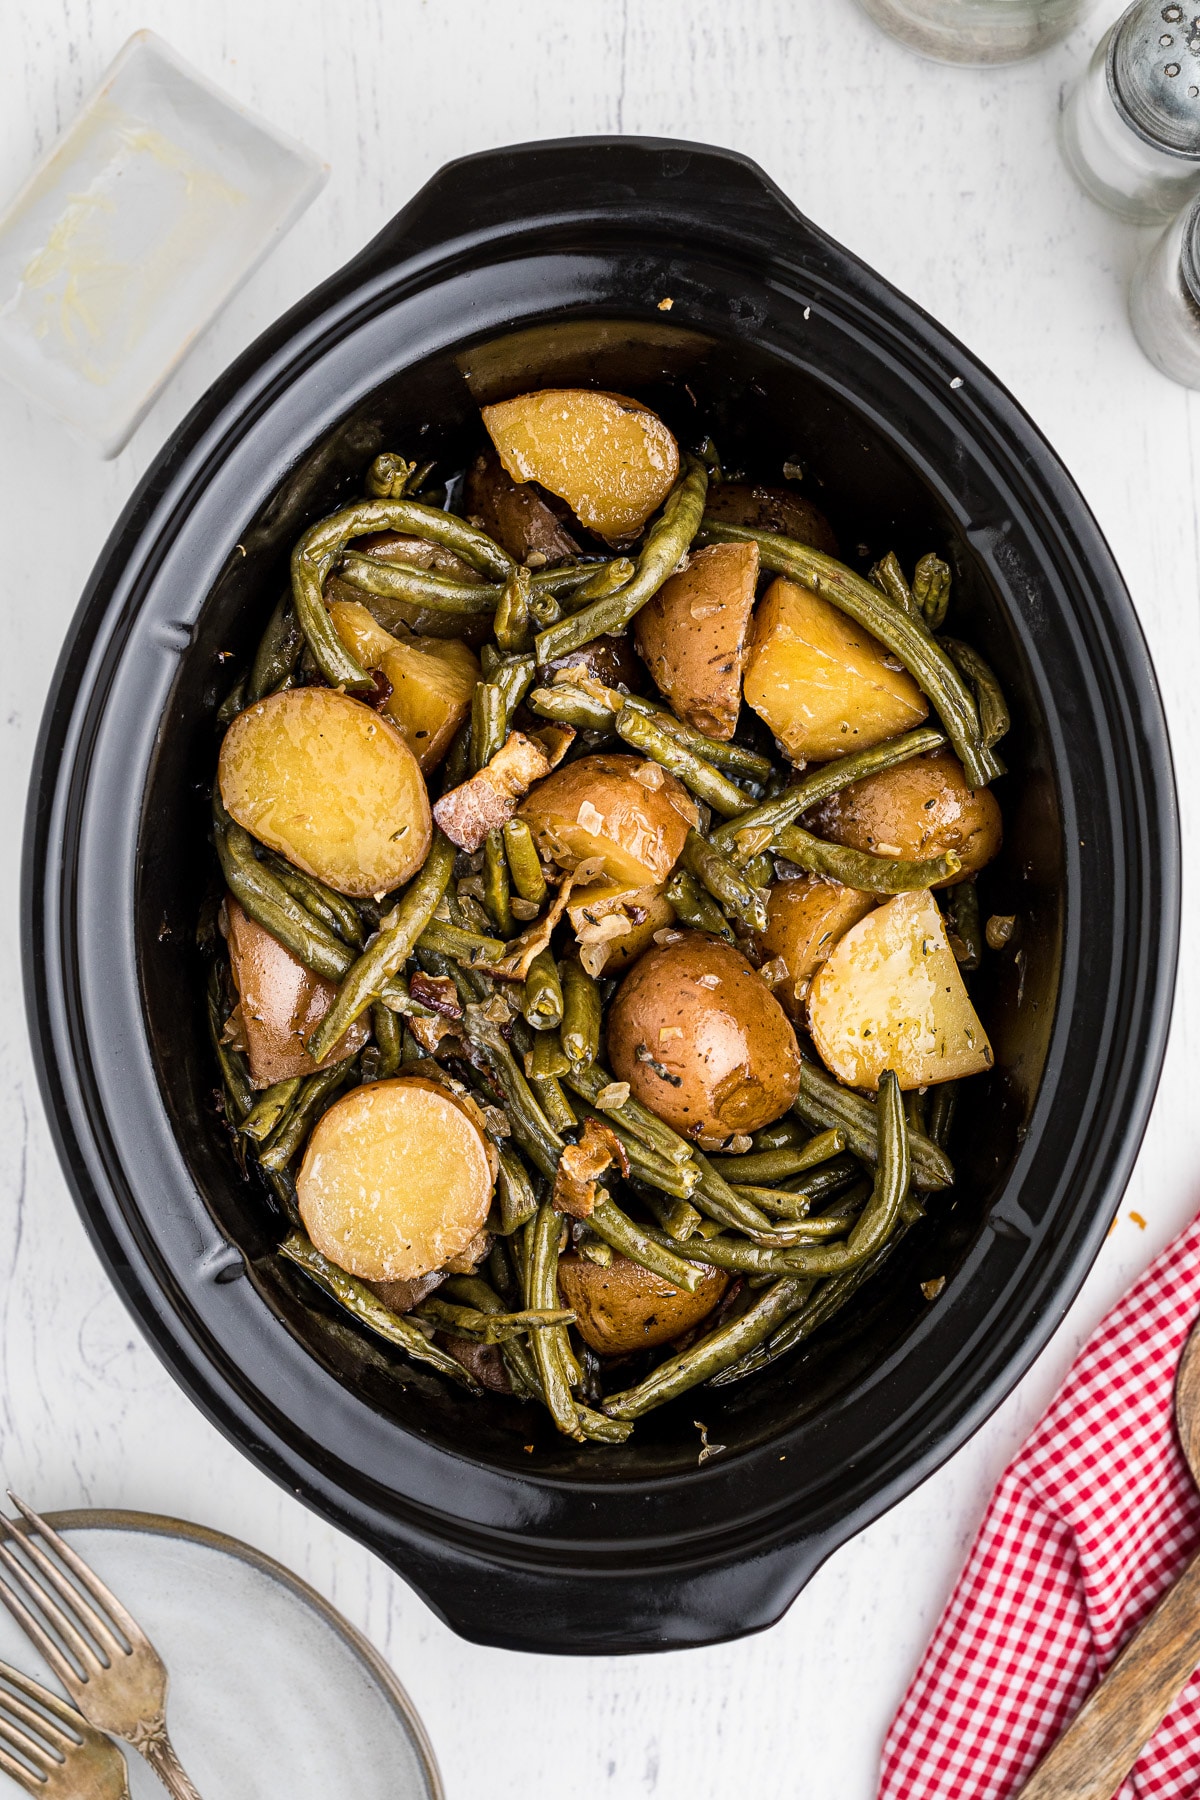 green beans and potatoes in the slow cooker